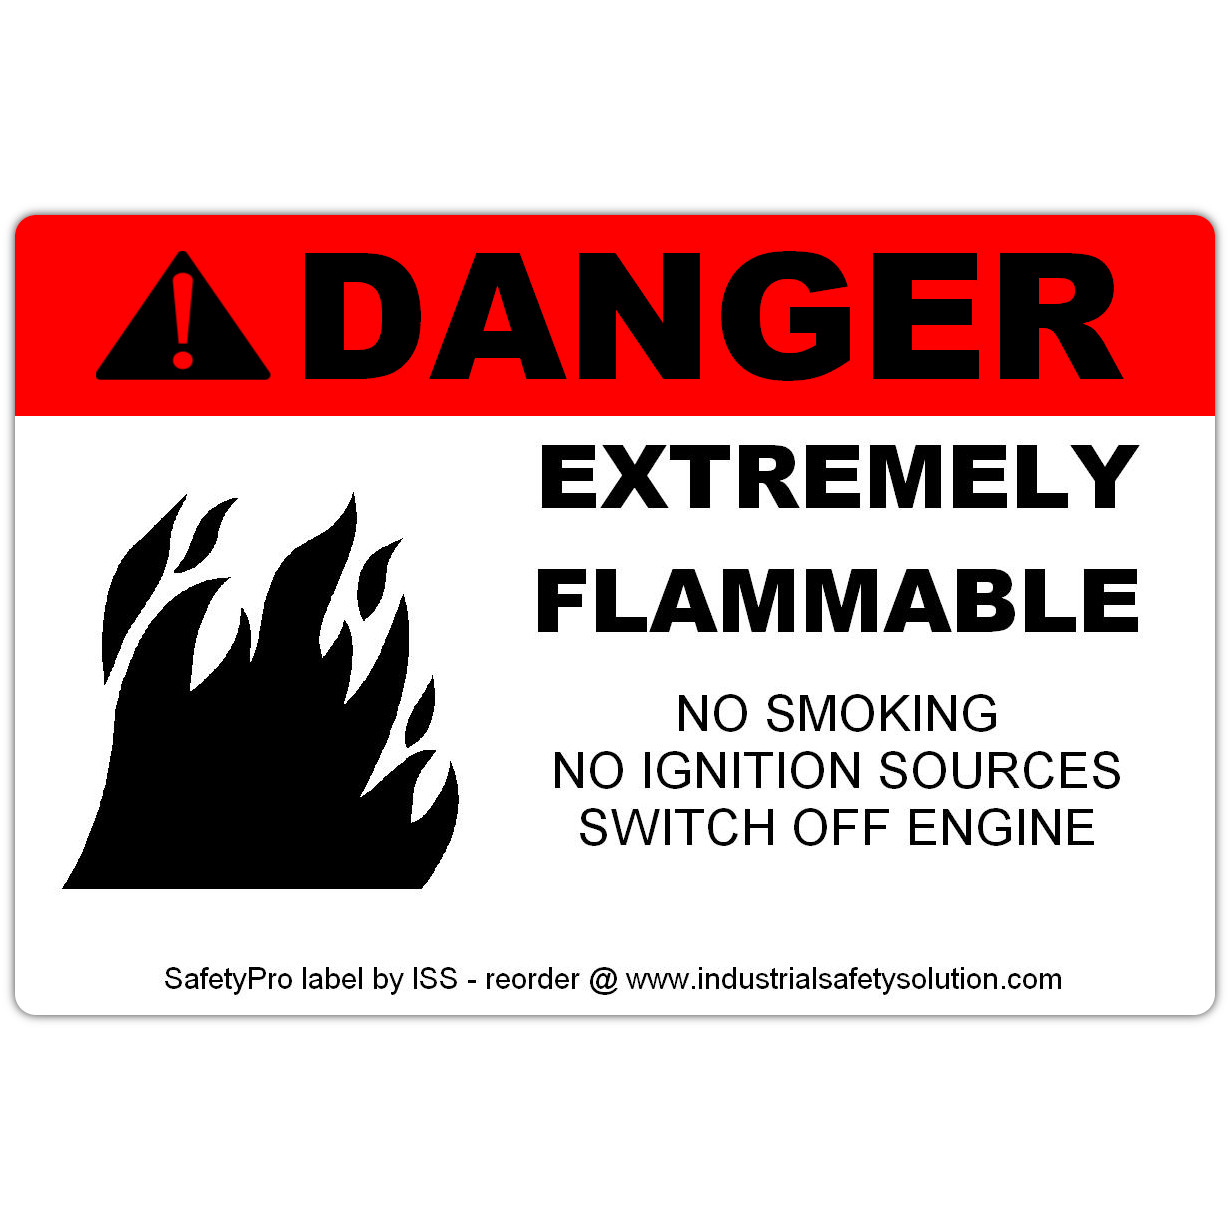 Detail view for 4" x 6" DANGER Extremely Flammable Safety Label